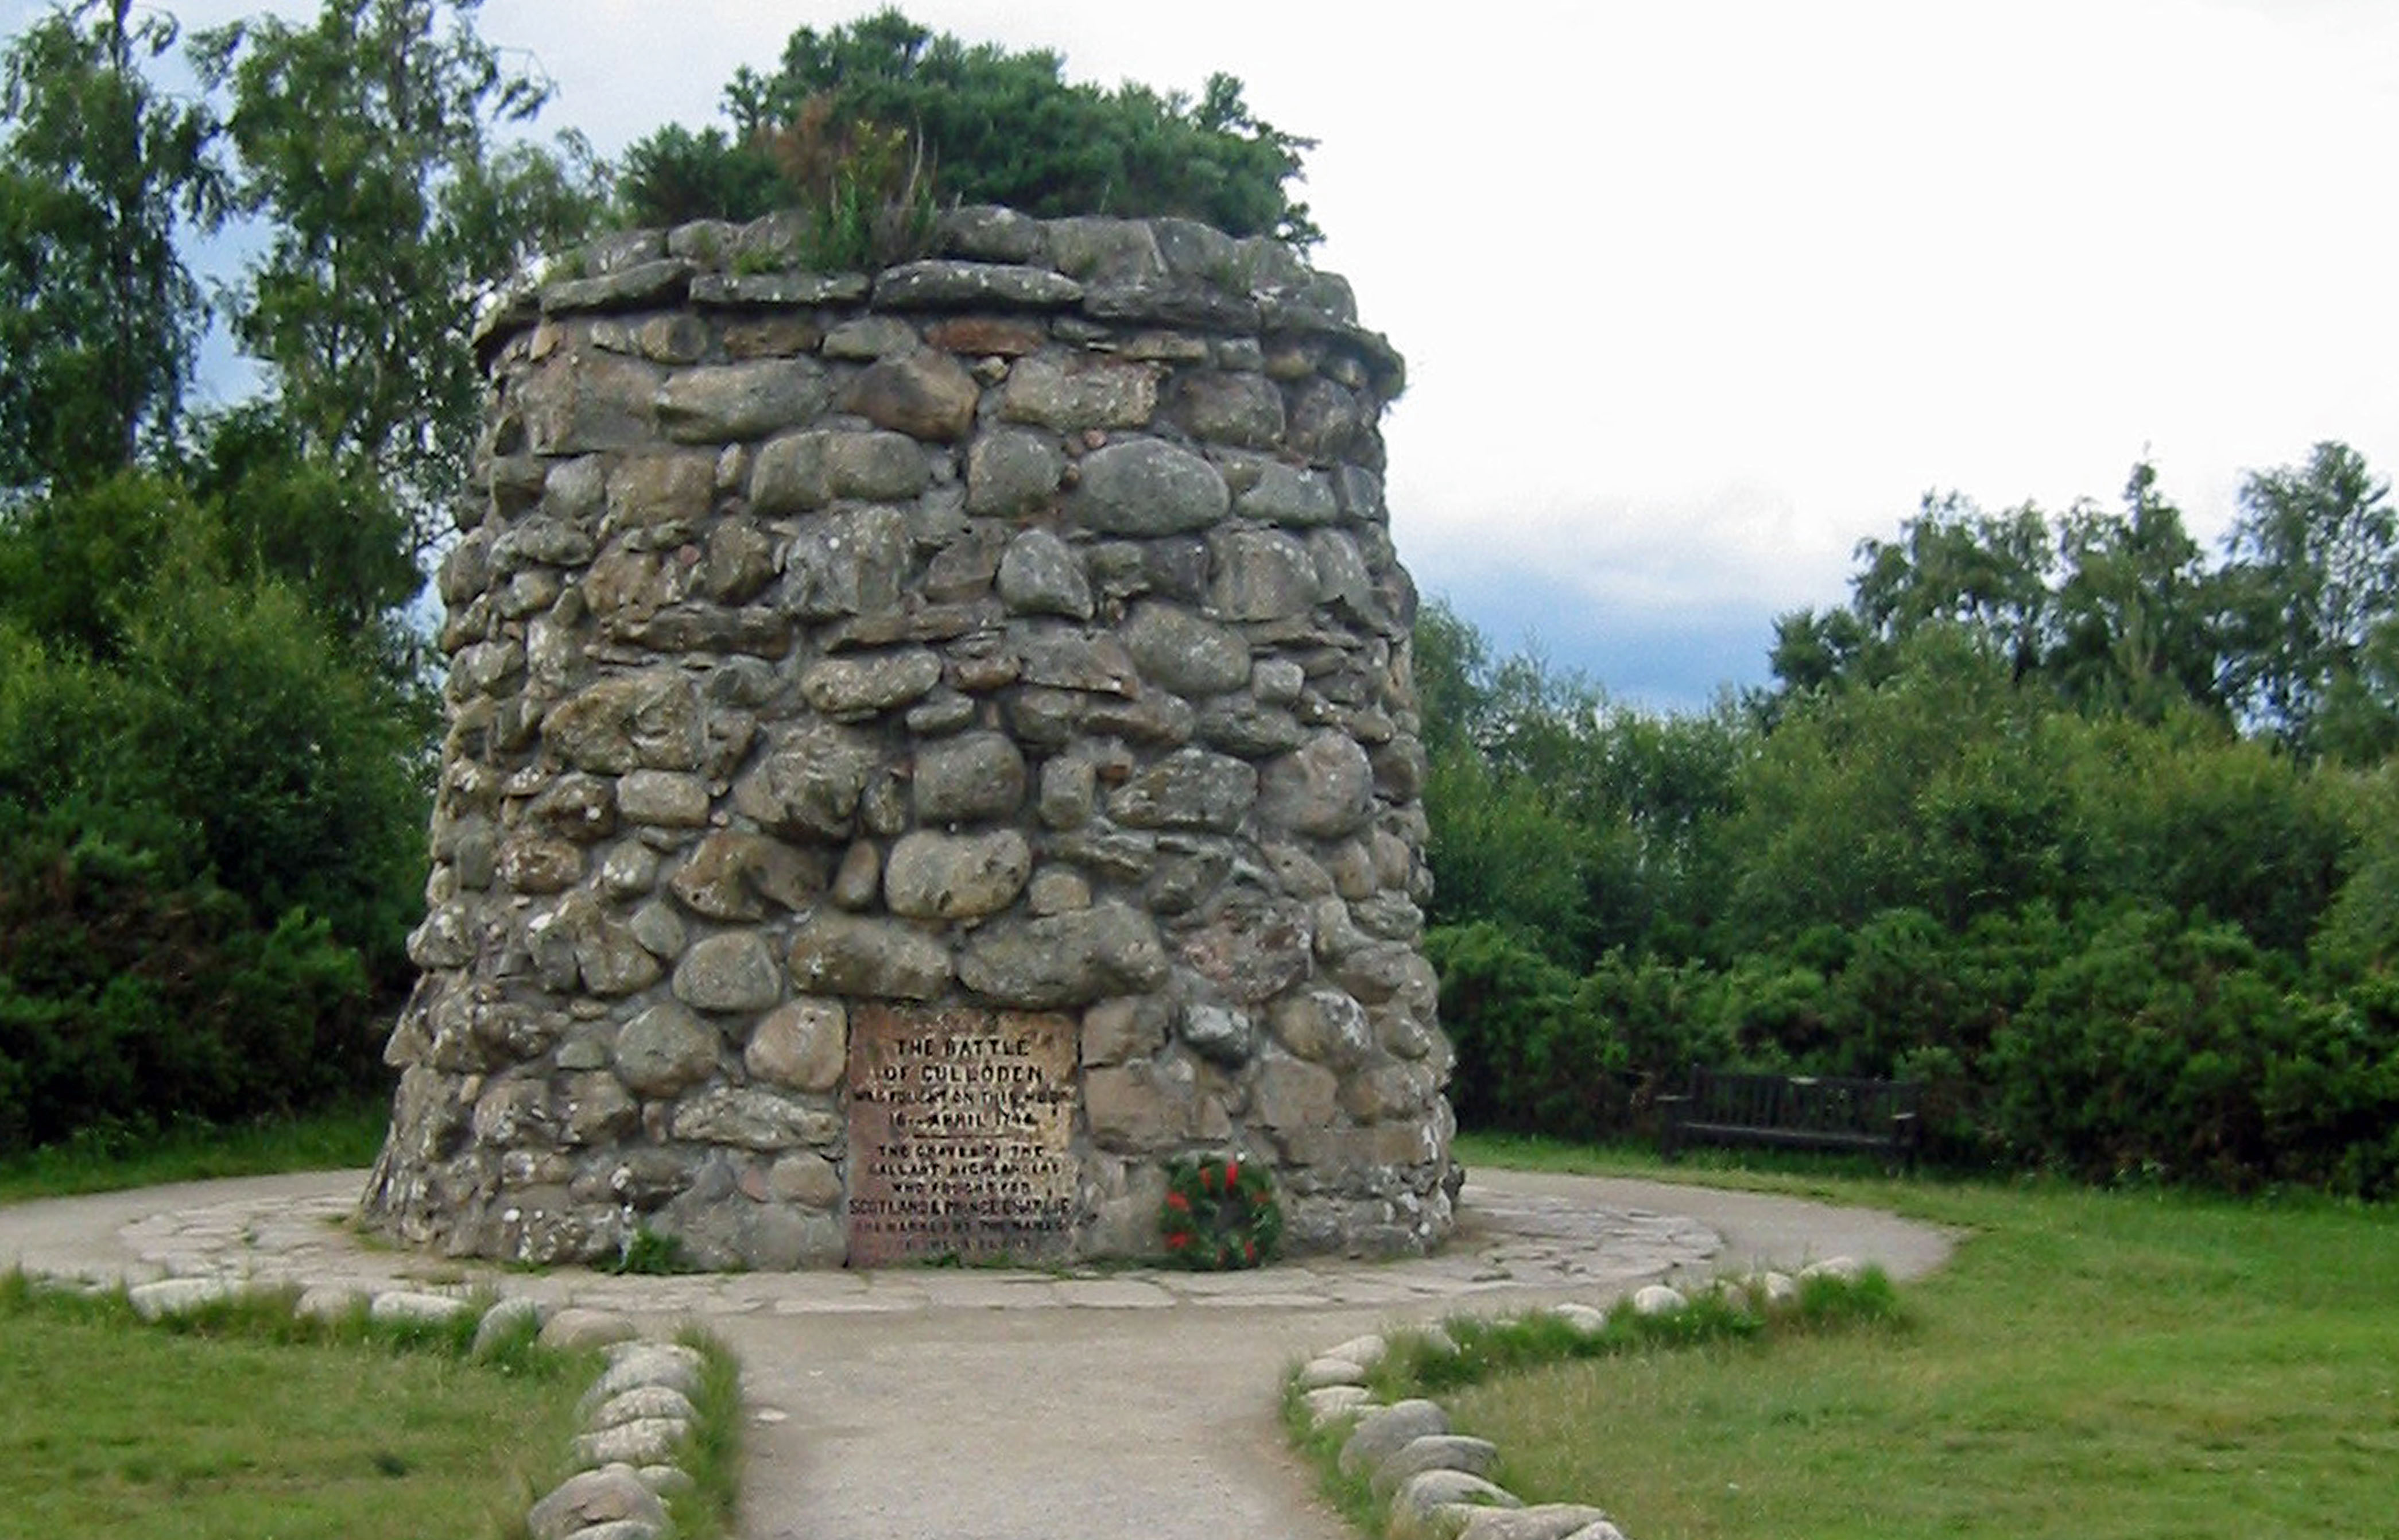 Cairn at Scotland’s Culloden Battlefield (Photo by Don Knebel)